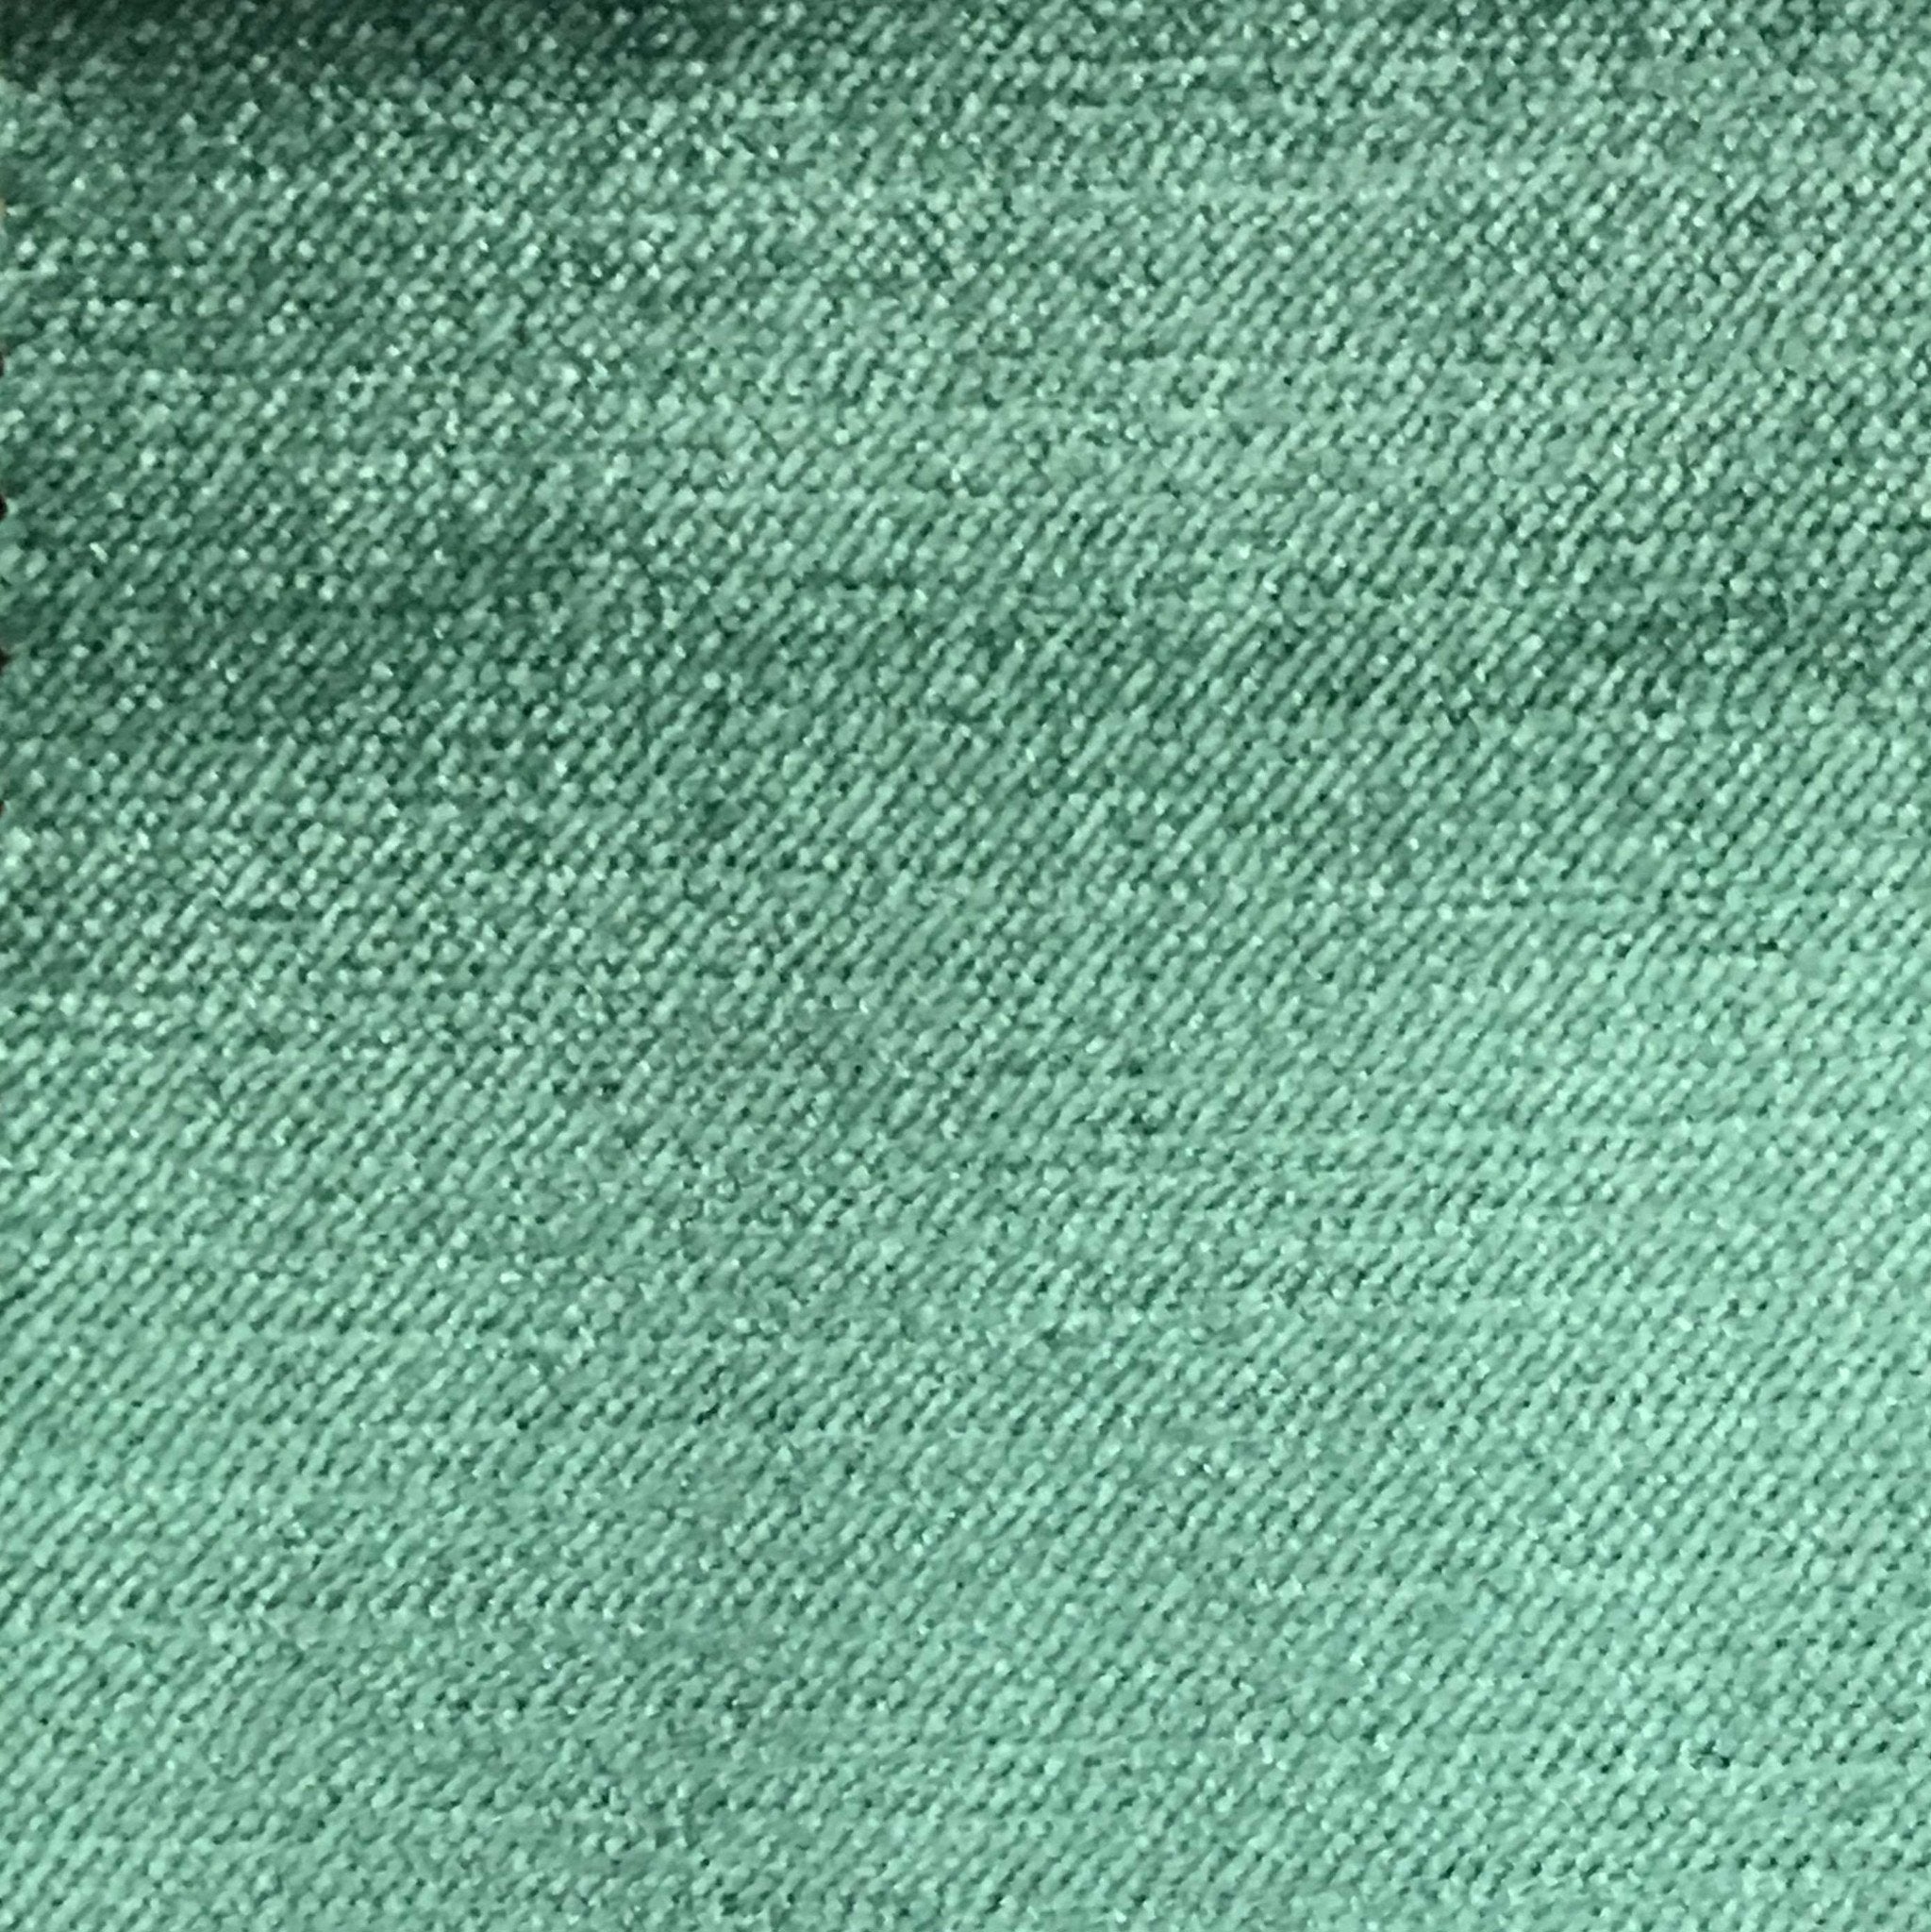 Is Viscose A Good Fabric For Upholstery?